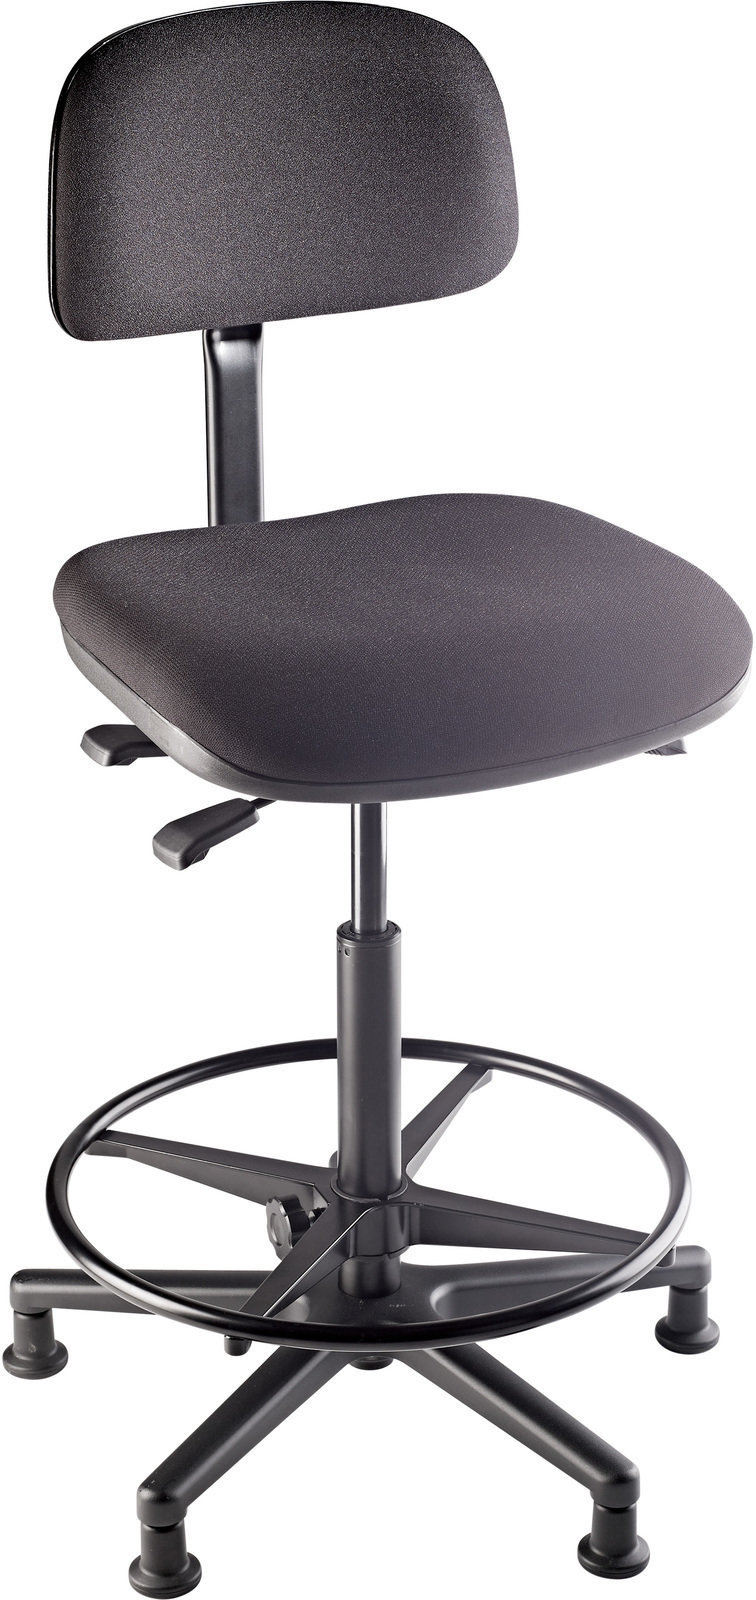 Orchestra chair Konig & Meyer 13480 Chair for Kettledrums And Conductor’S Black